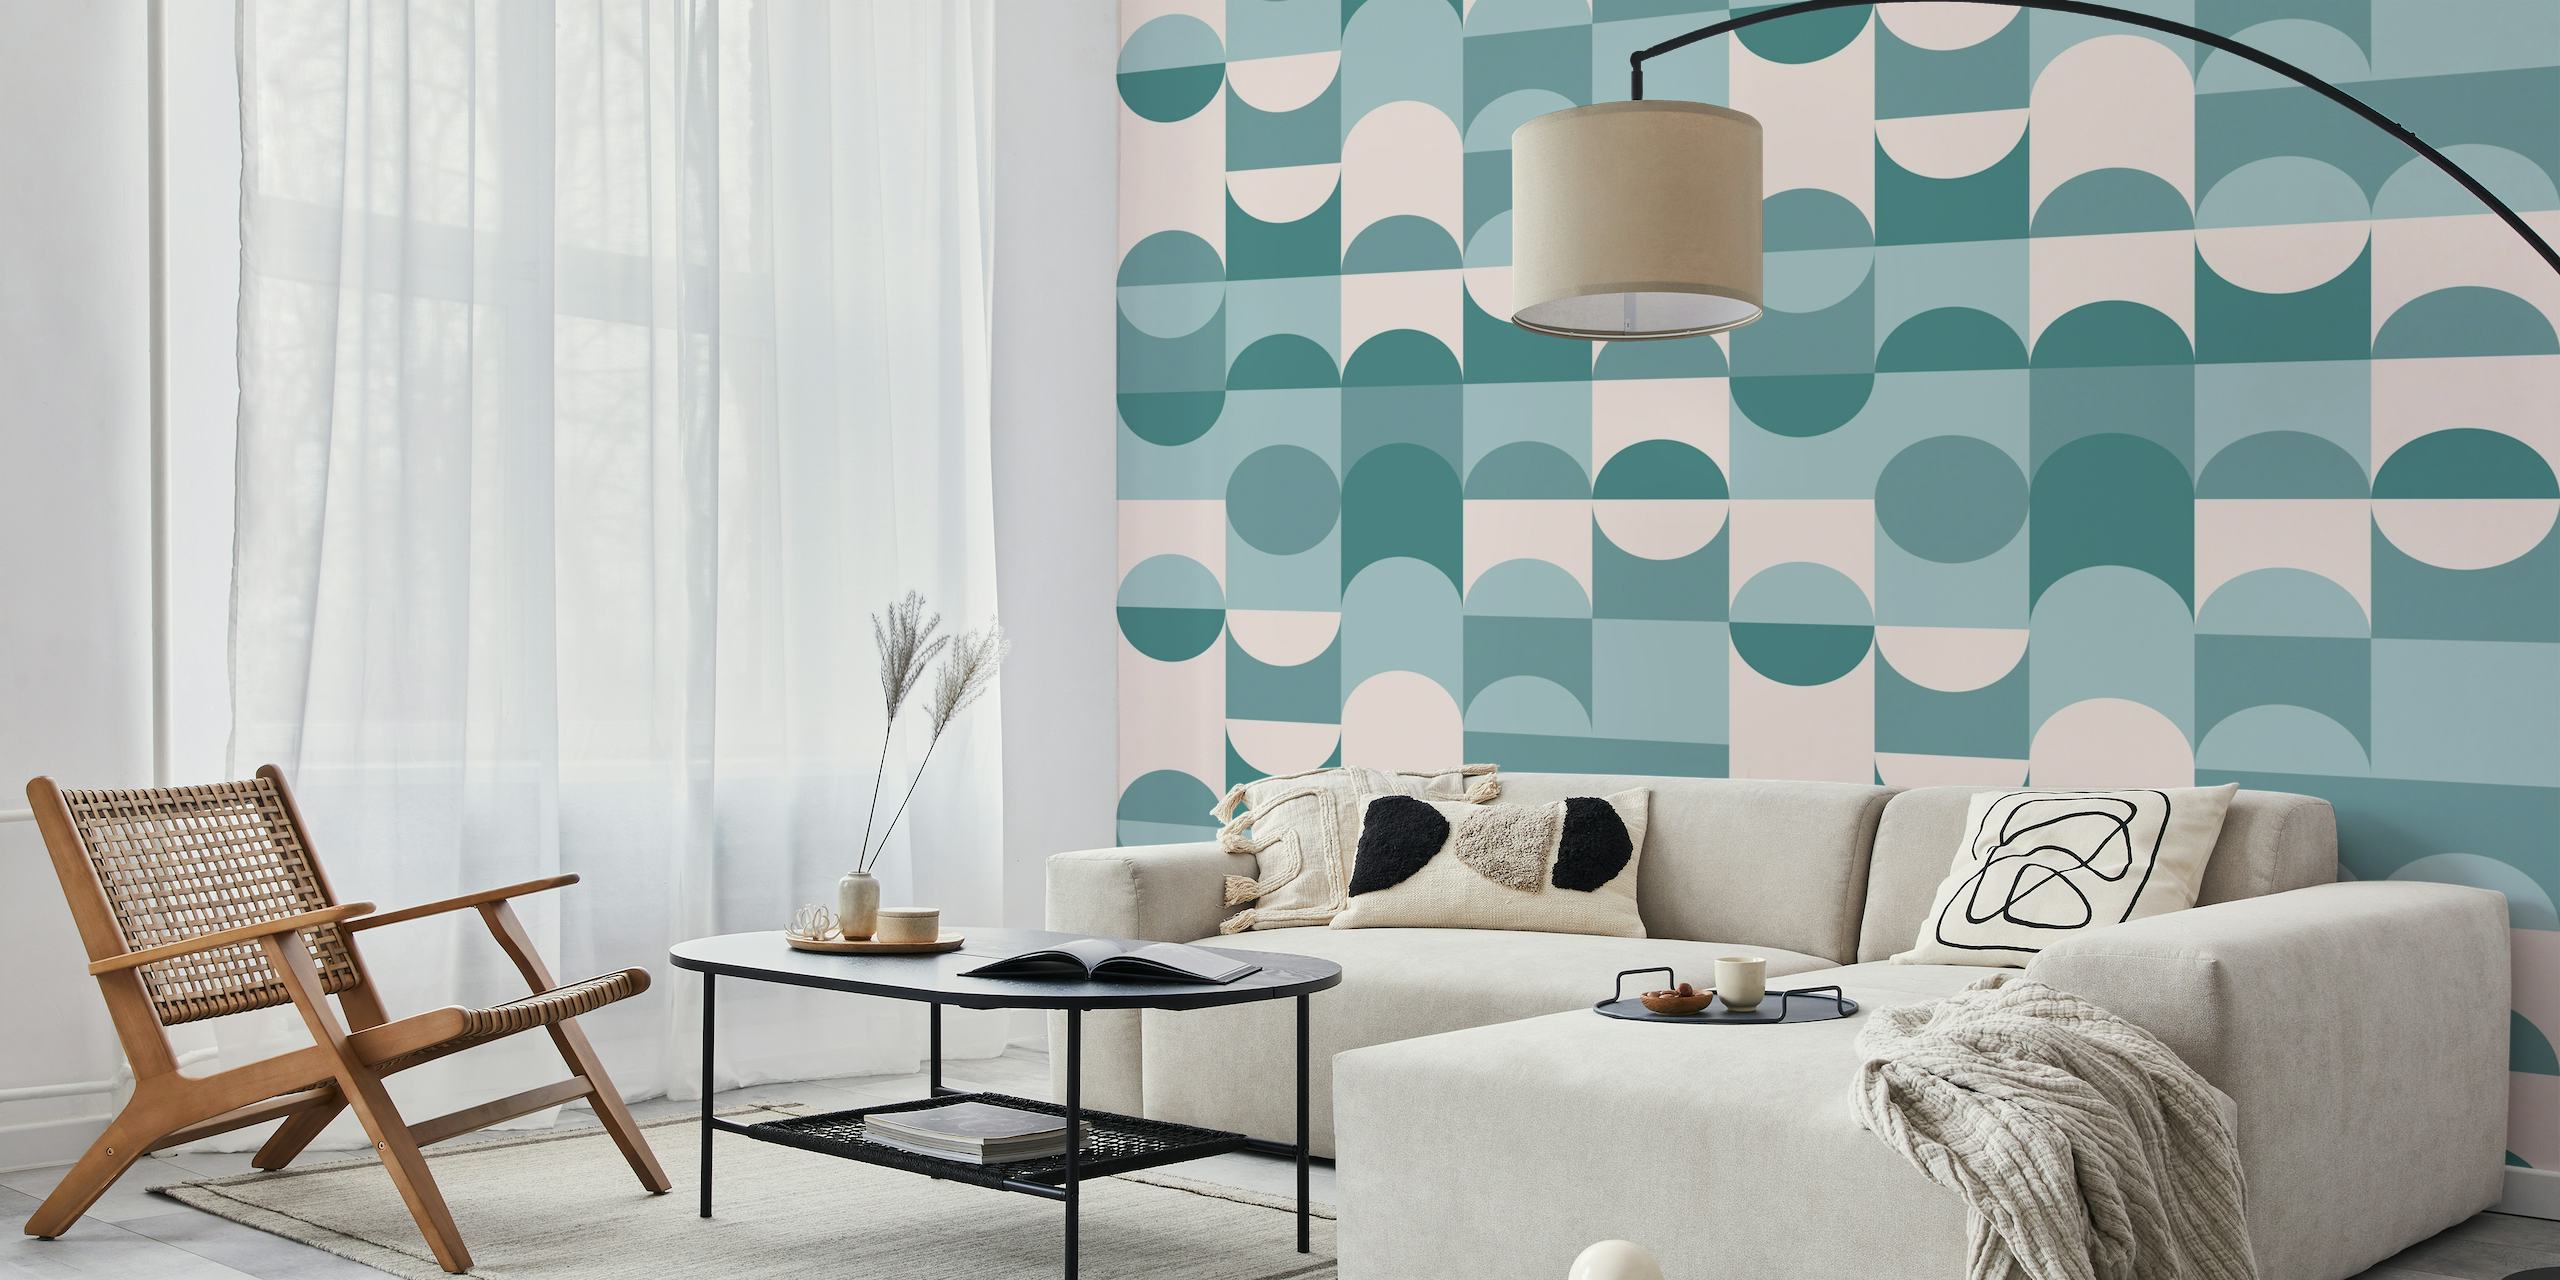 Geometric Retro Shapes Wall Mural in Teal and Beige